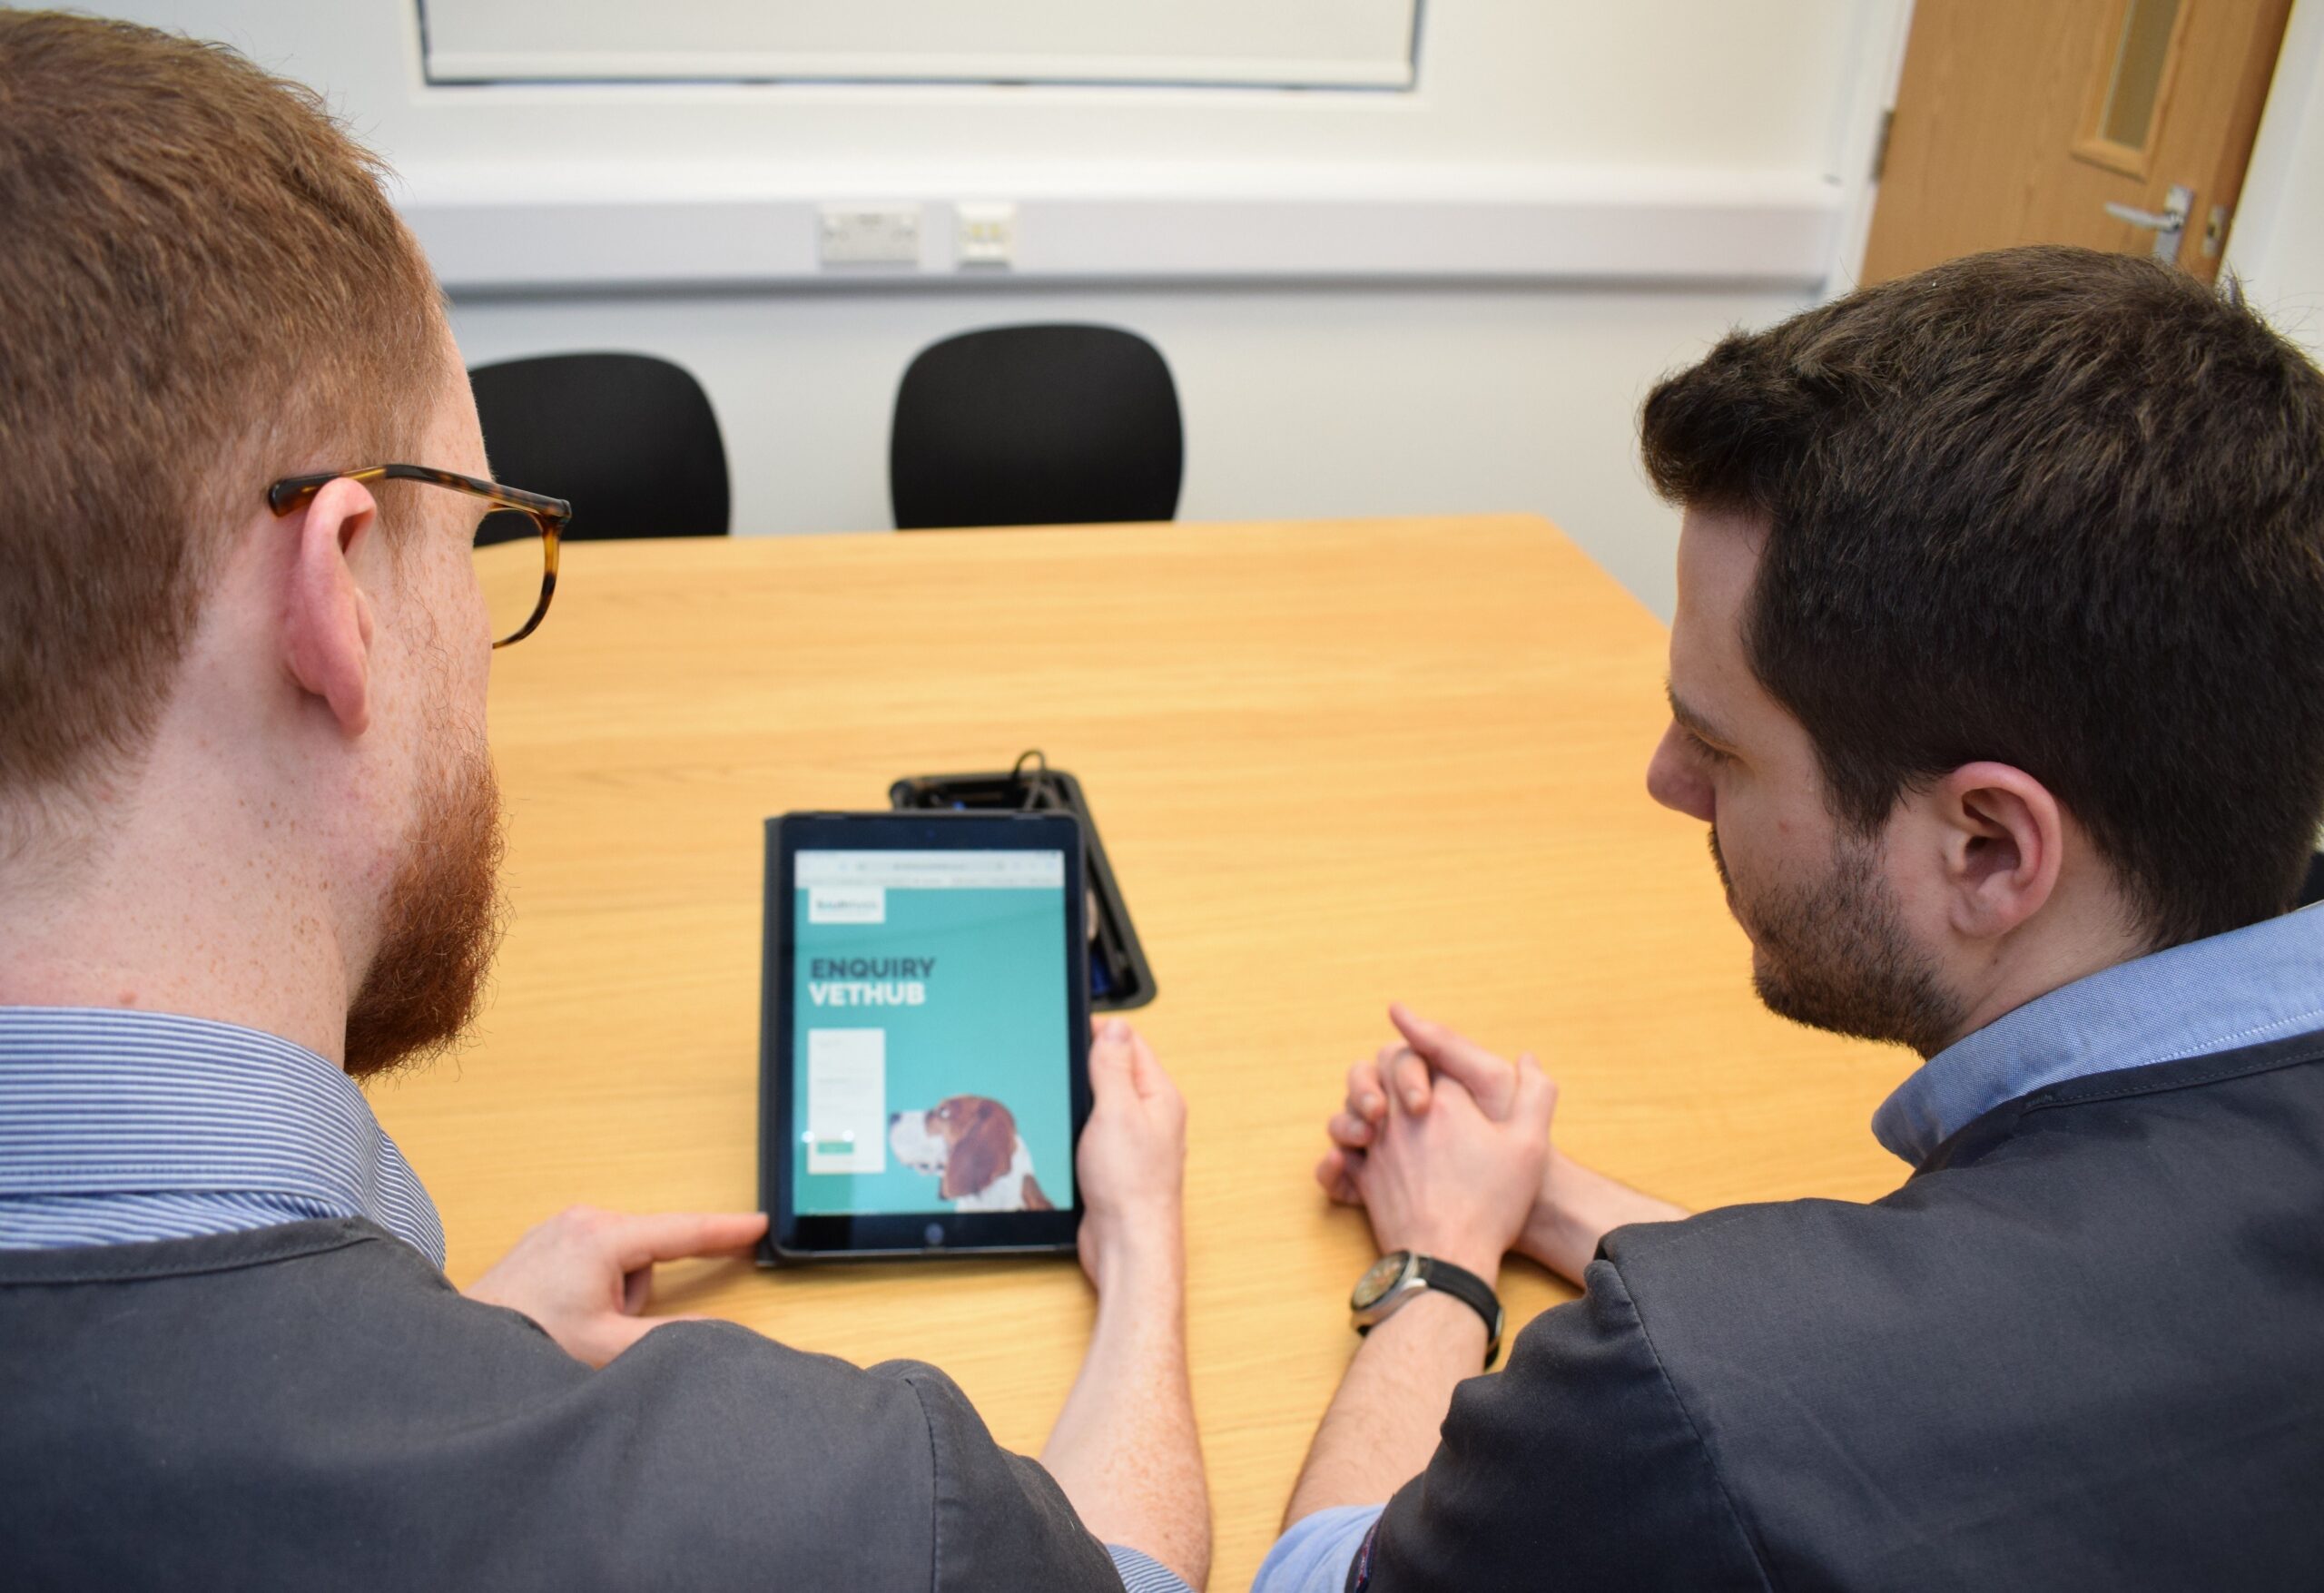 Southfields Launches Pioneering Technology Vethub